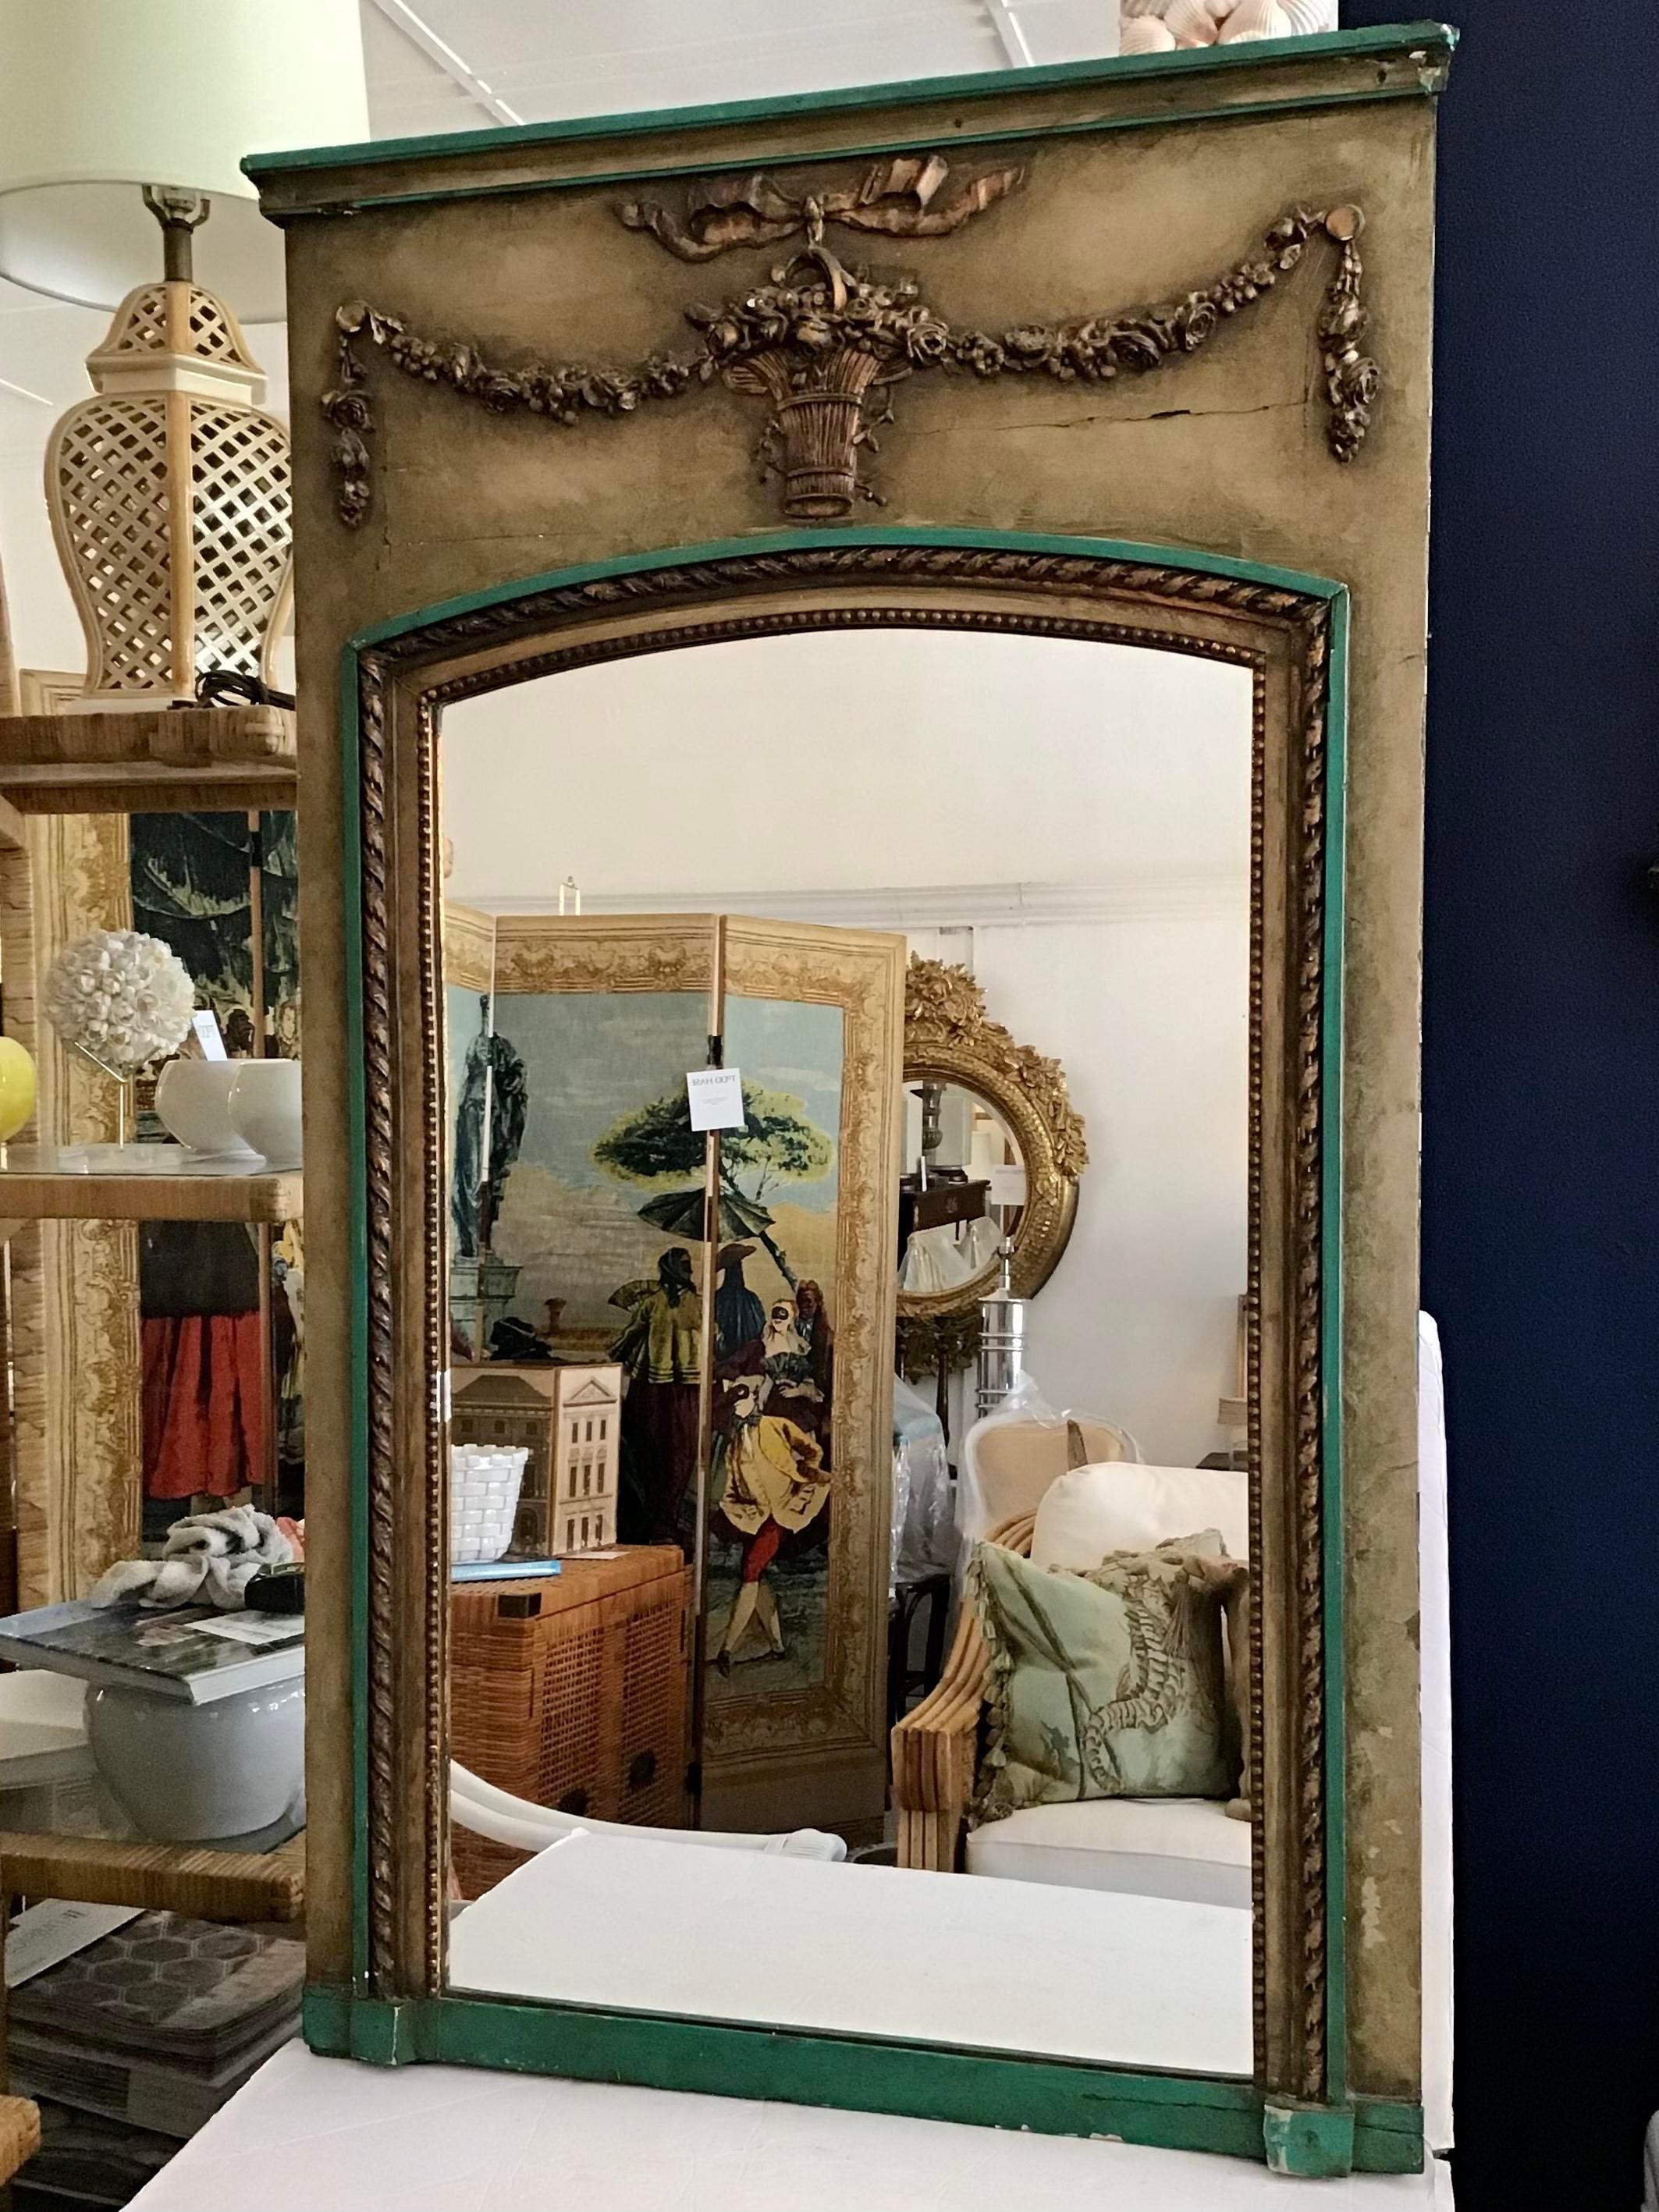 French Provincial Small Classic French Boiserie Mirror in Original Painted Finish